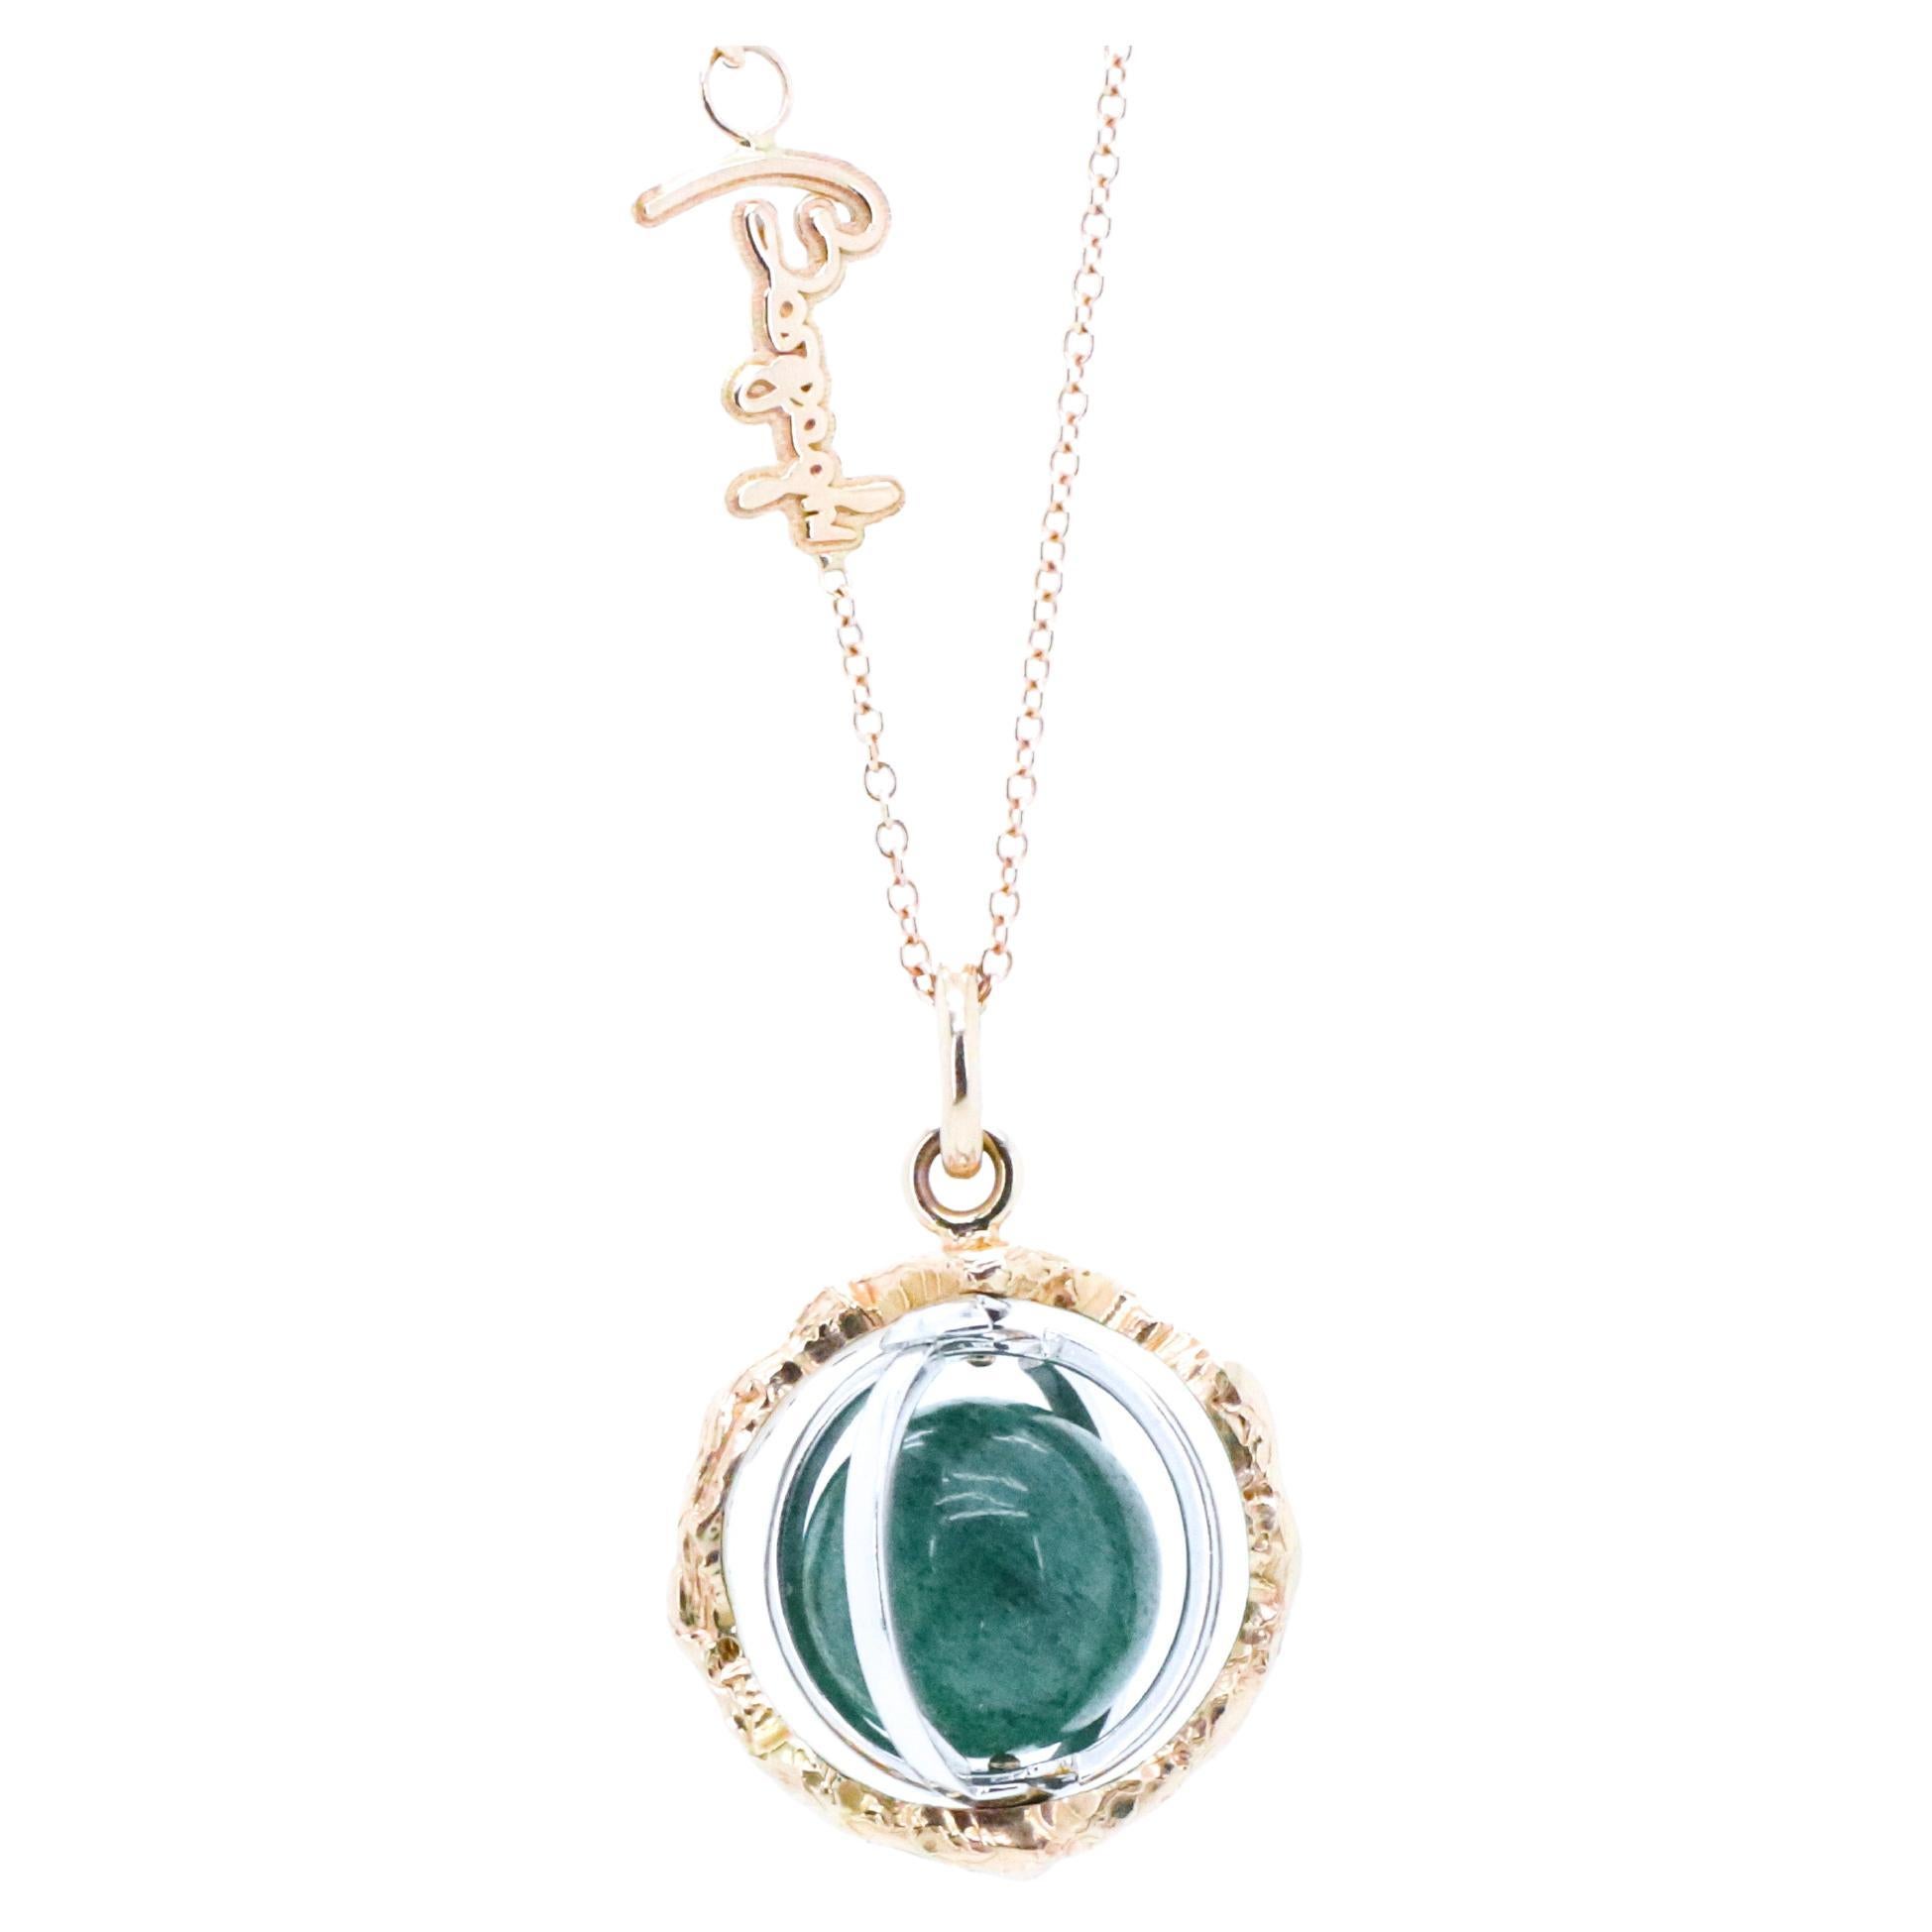 18k Gold Made in Italy Aventurine Changeable Gem Revolving Loops Essence Necklace.
Experience the Wellbeing of Sound and Gemstones with the Sonoro Pendant Necklace.
Unlock Your Divine Potential with the Sonoro pendant. 
Gems and metal are